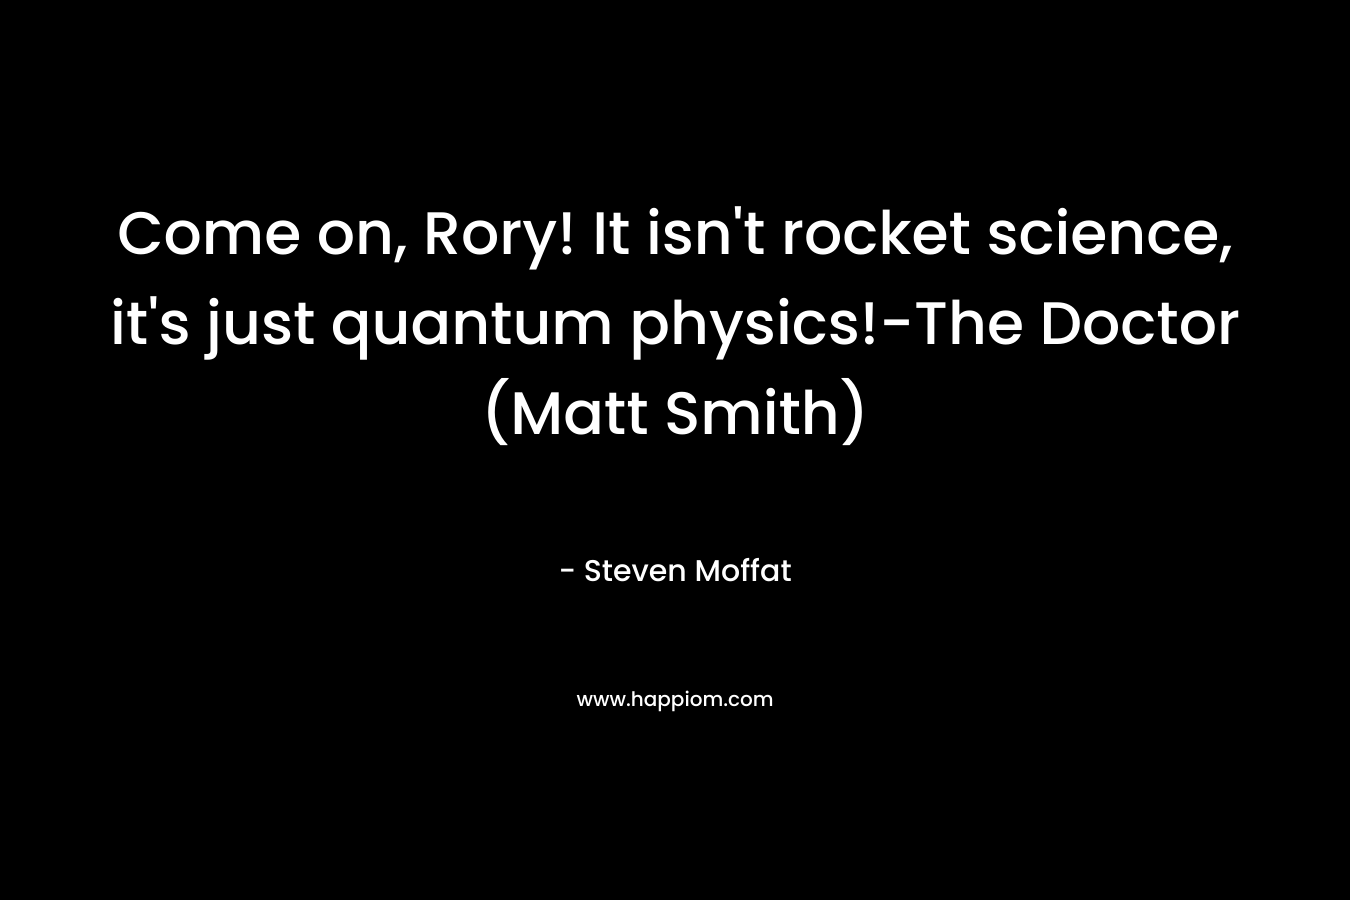 Come on, Rory! It isn't rocket science, it's just quantum physics!-The Doctor (Matt Smith)